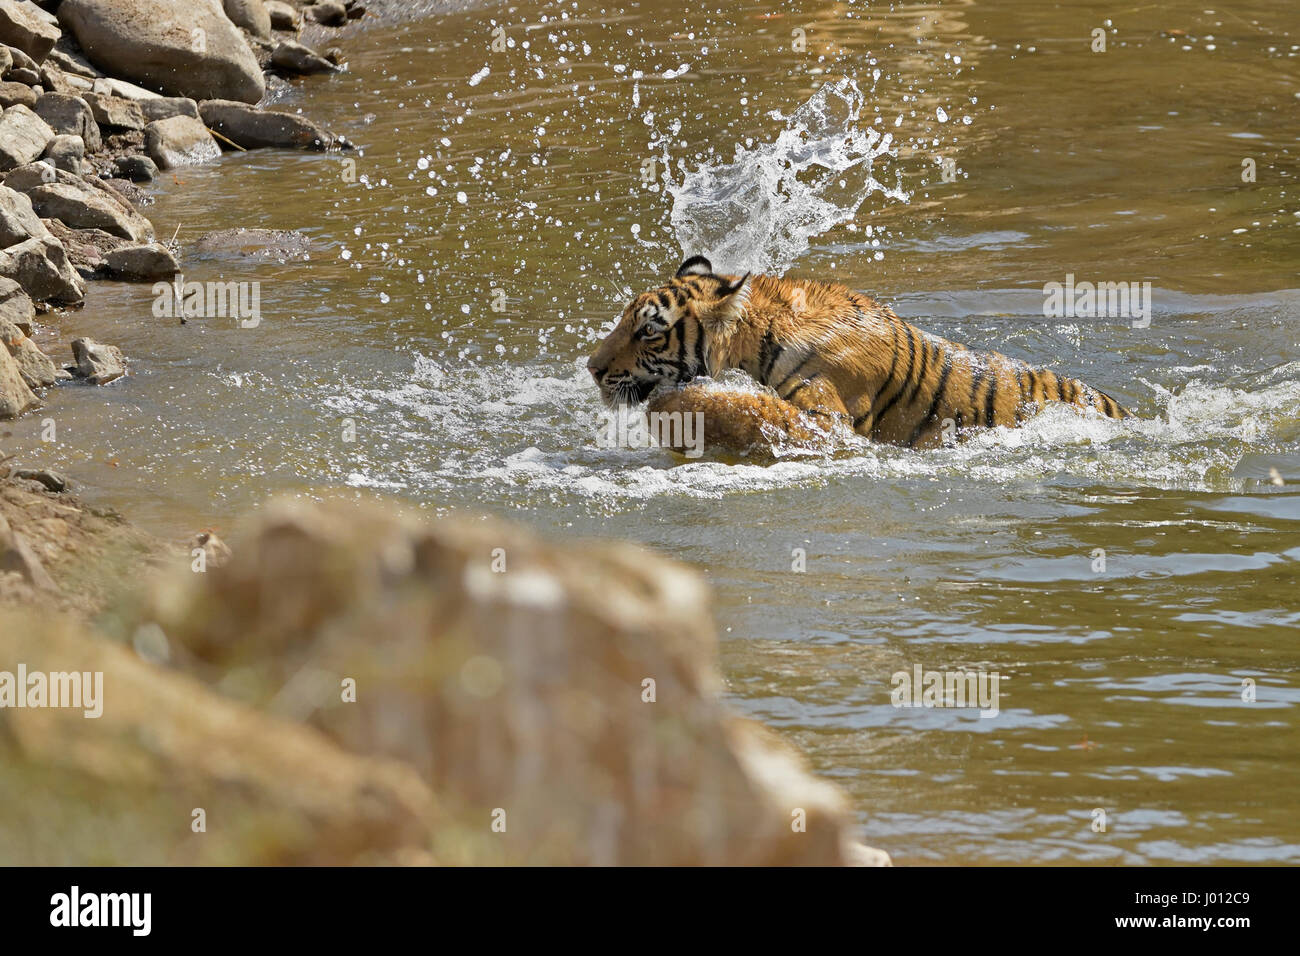 A wild tiger playing in a water hole during the hot and dry summers in Ranthambhore tiger reserve of India Stock Photo